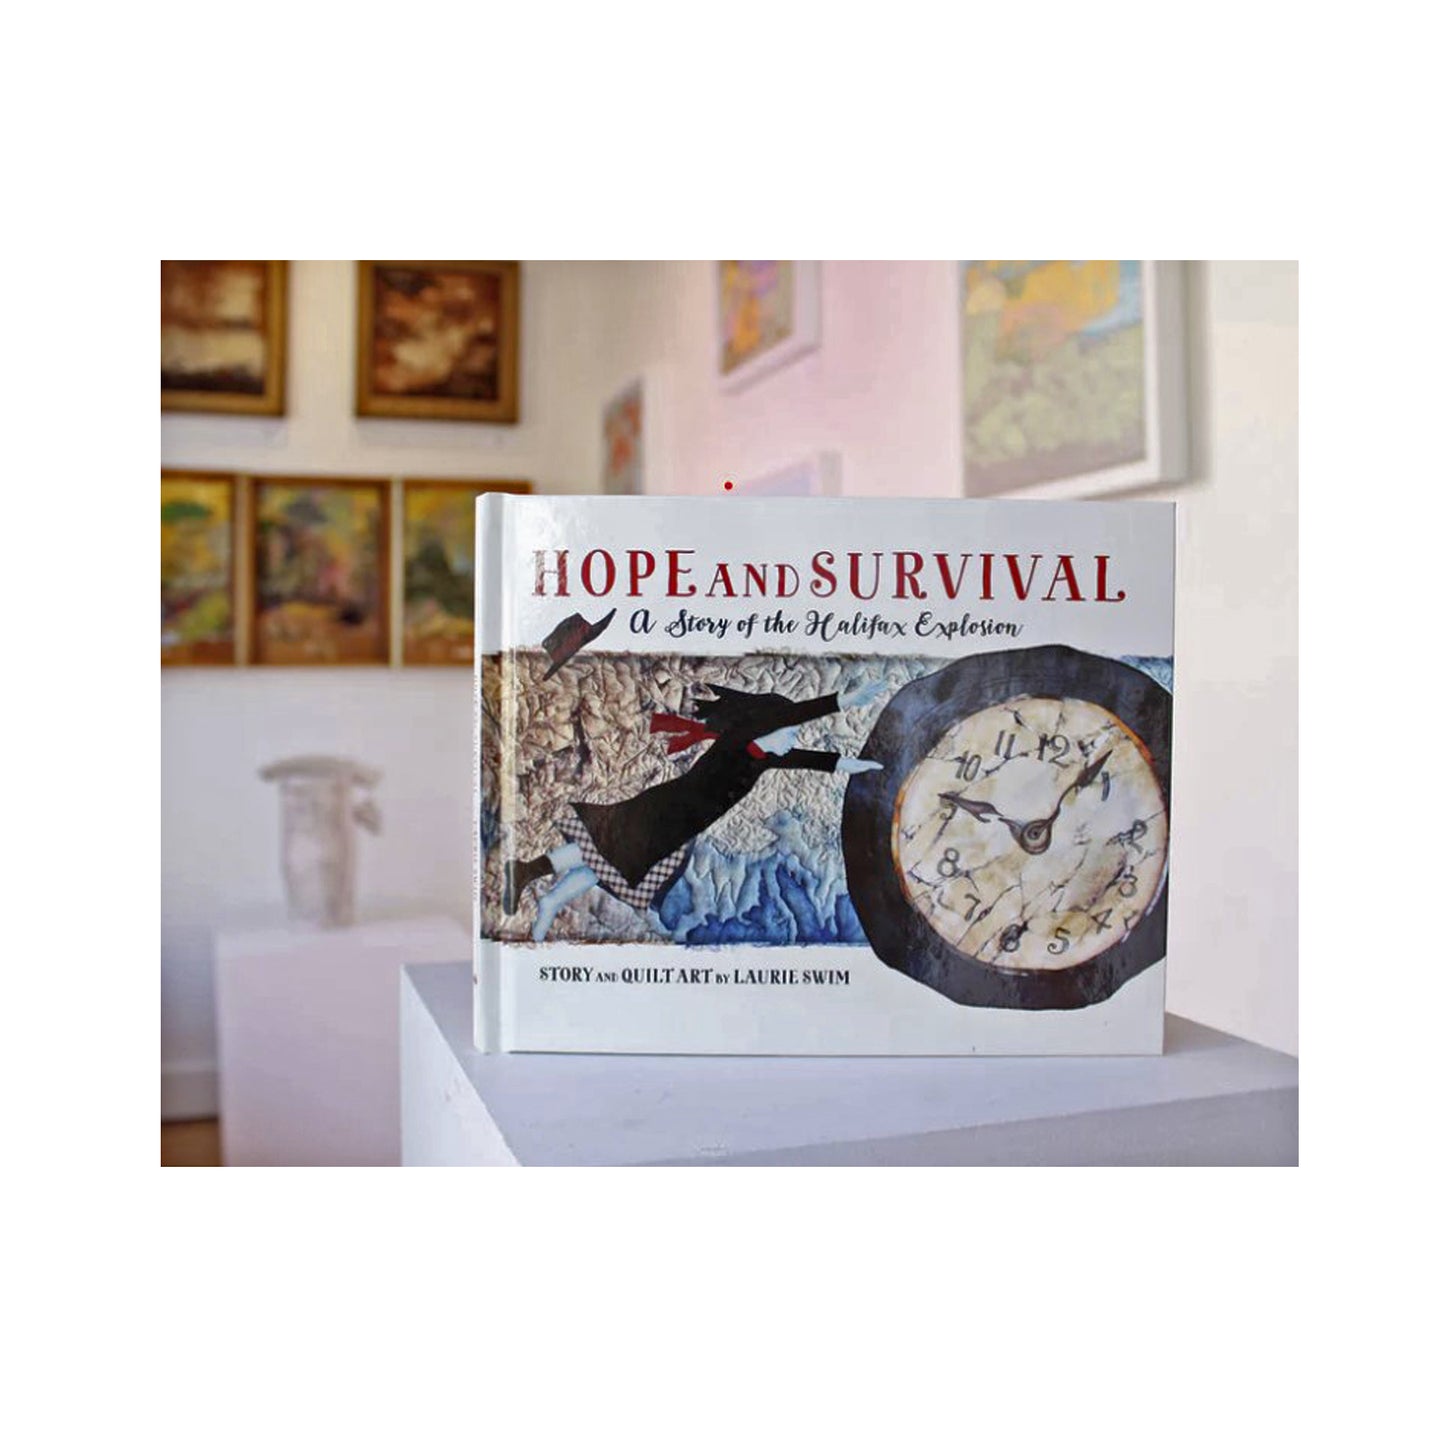 Hope and Survival: A Story of the Halifax Explosion